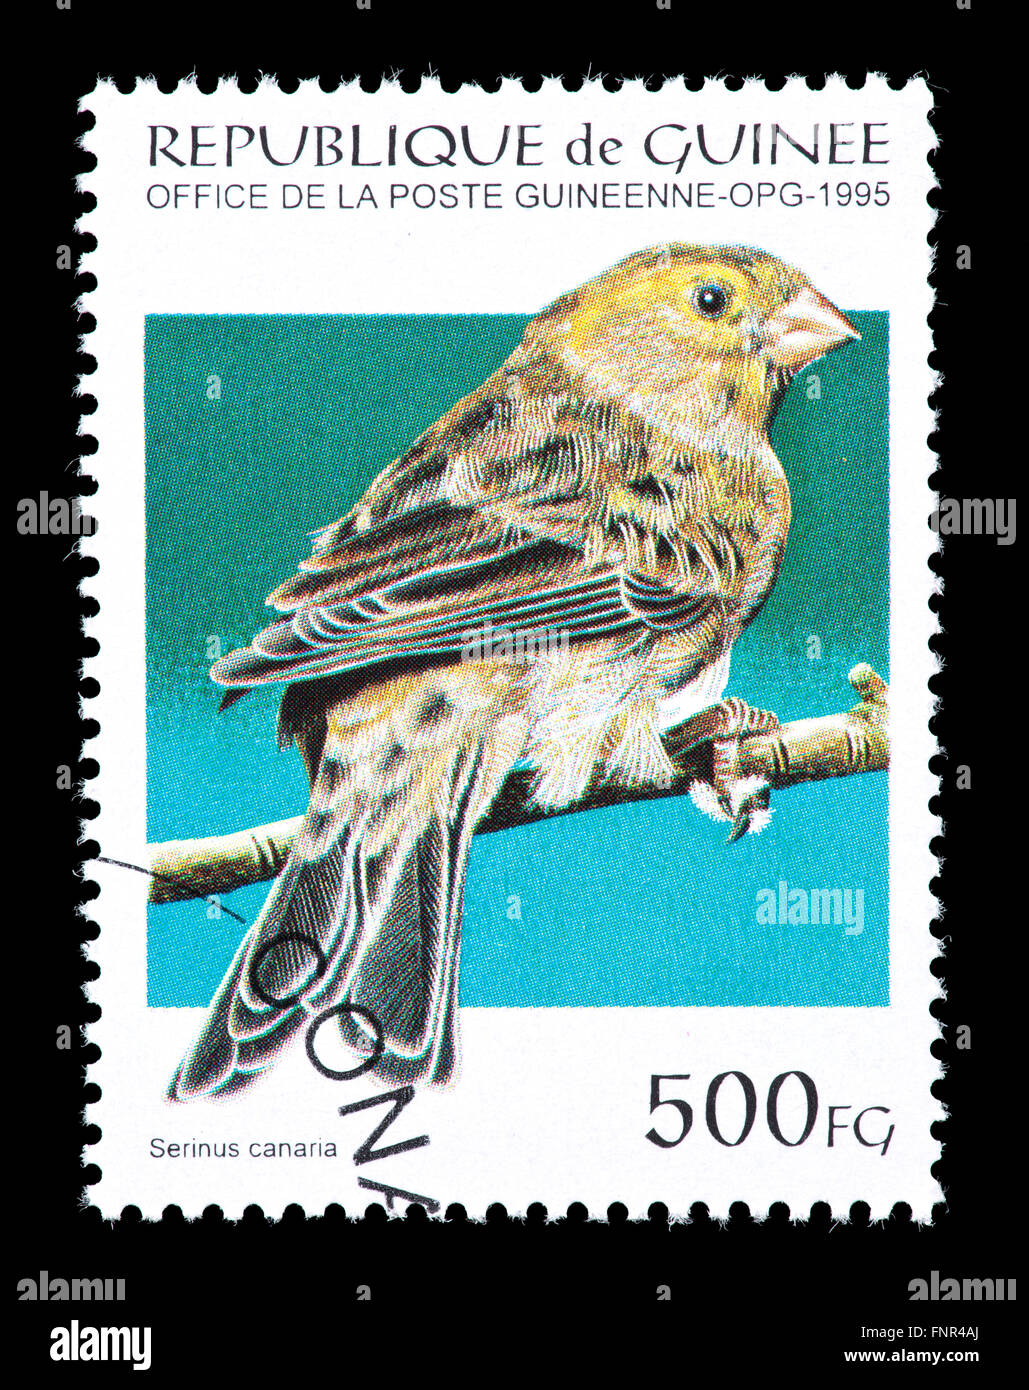 Postage stamp from Guinea depicting  Atlantic canary (Serinus canaria) Stock Photo